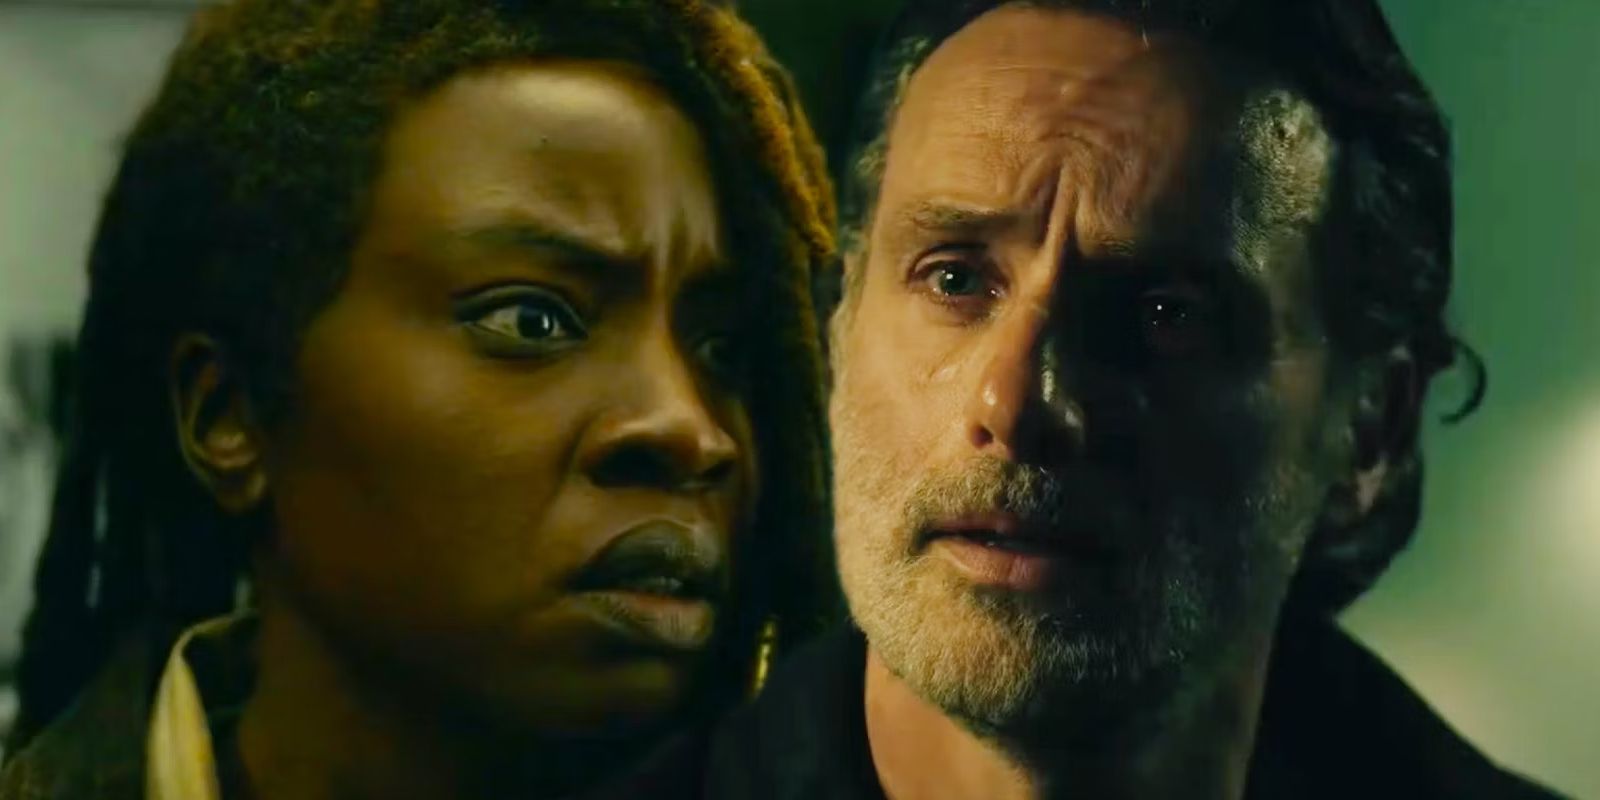 Walking Dead: The Ones Who Live': Inside Rick and Michonne's Reunion